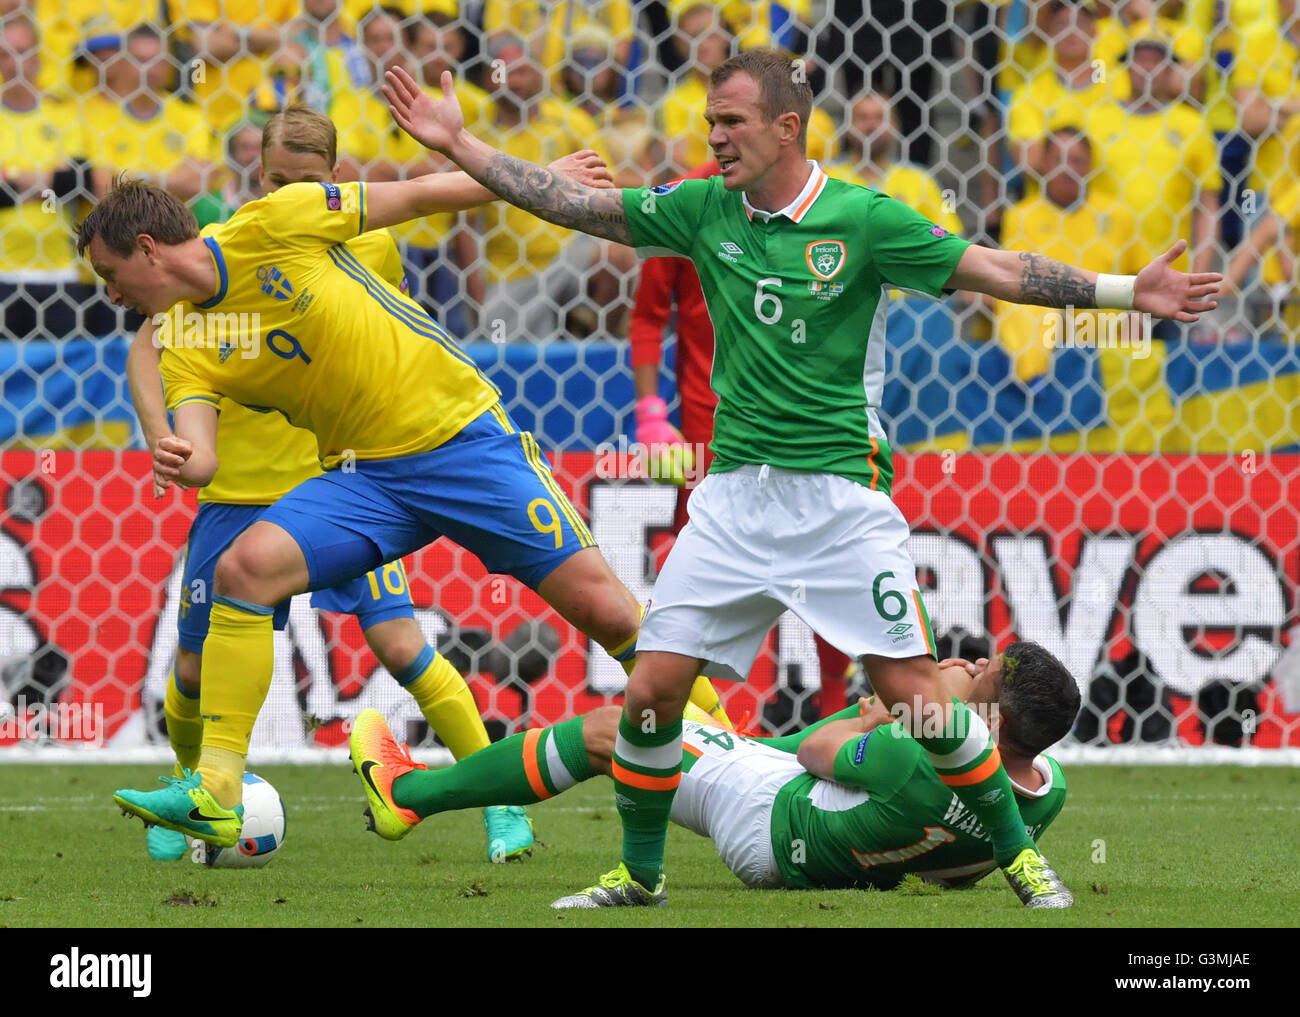 St. Denis, France. 13th June, 2016. Kim Kallstrom (L) of Sweden vies for the ball with Glenn Whelan (R) of Irland while Jonathan Walters lies on the pitch during the Group E soccer match of the UEFA EURO 2016 between Ireland and Sweden at the Stade de France in St. Denis, France, 13 June 2016. Photo: Peter Kneffel/dpa/Alamy Live News Stock Photo